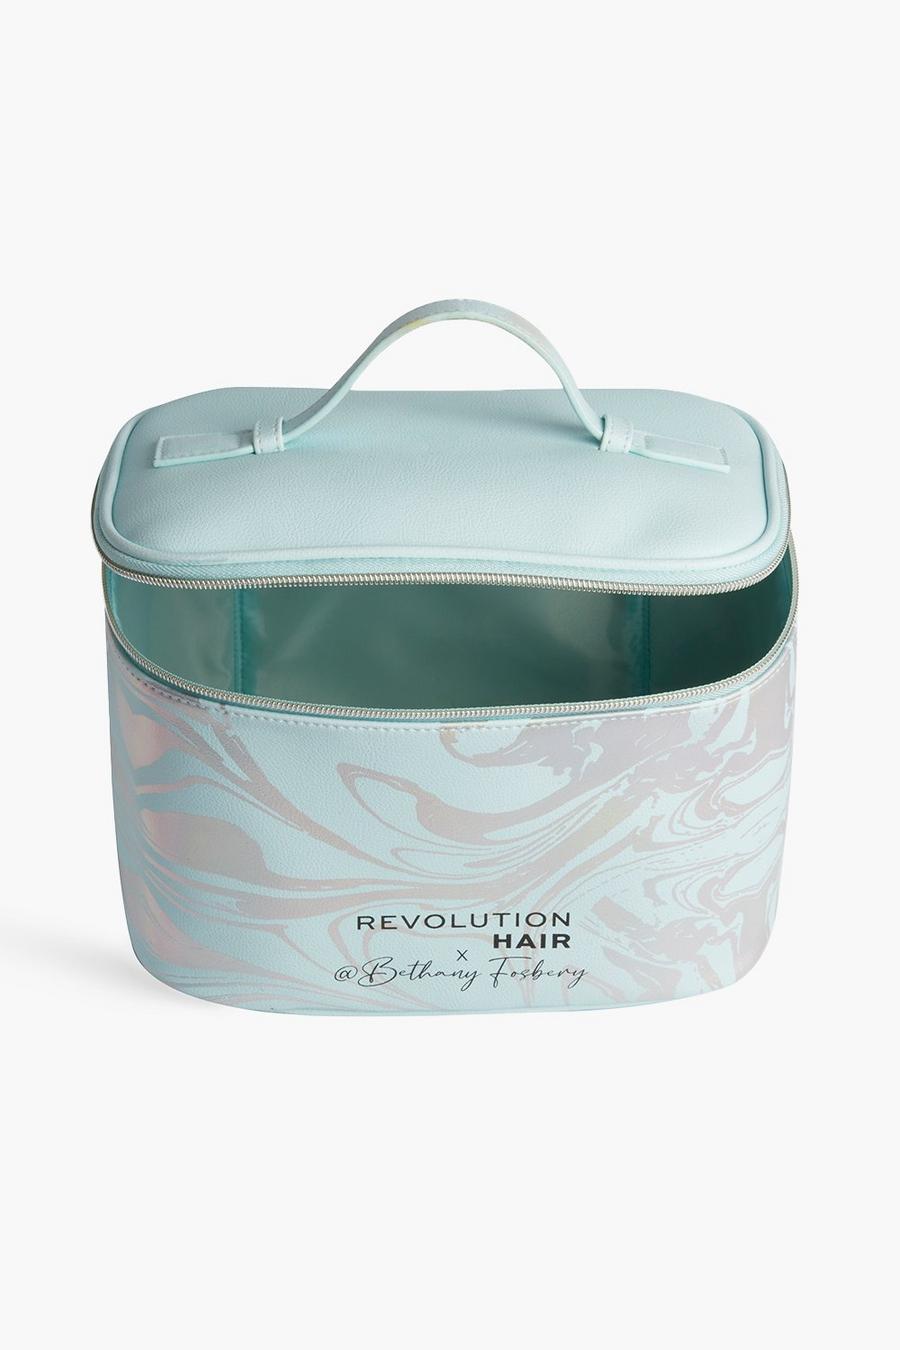 Revolution Haircare Bethany Fosbery Vanity Case, Blue image number 1